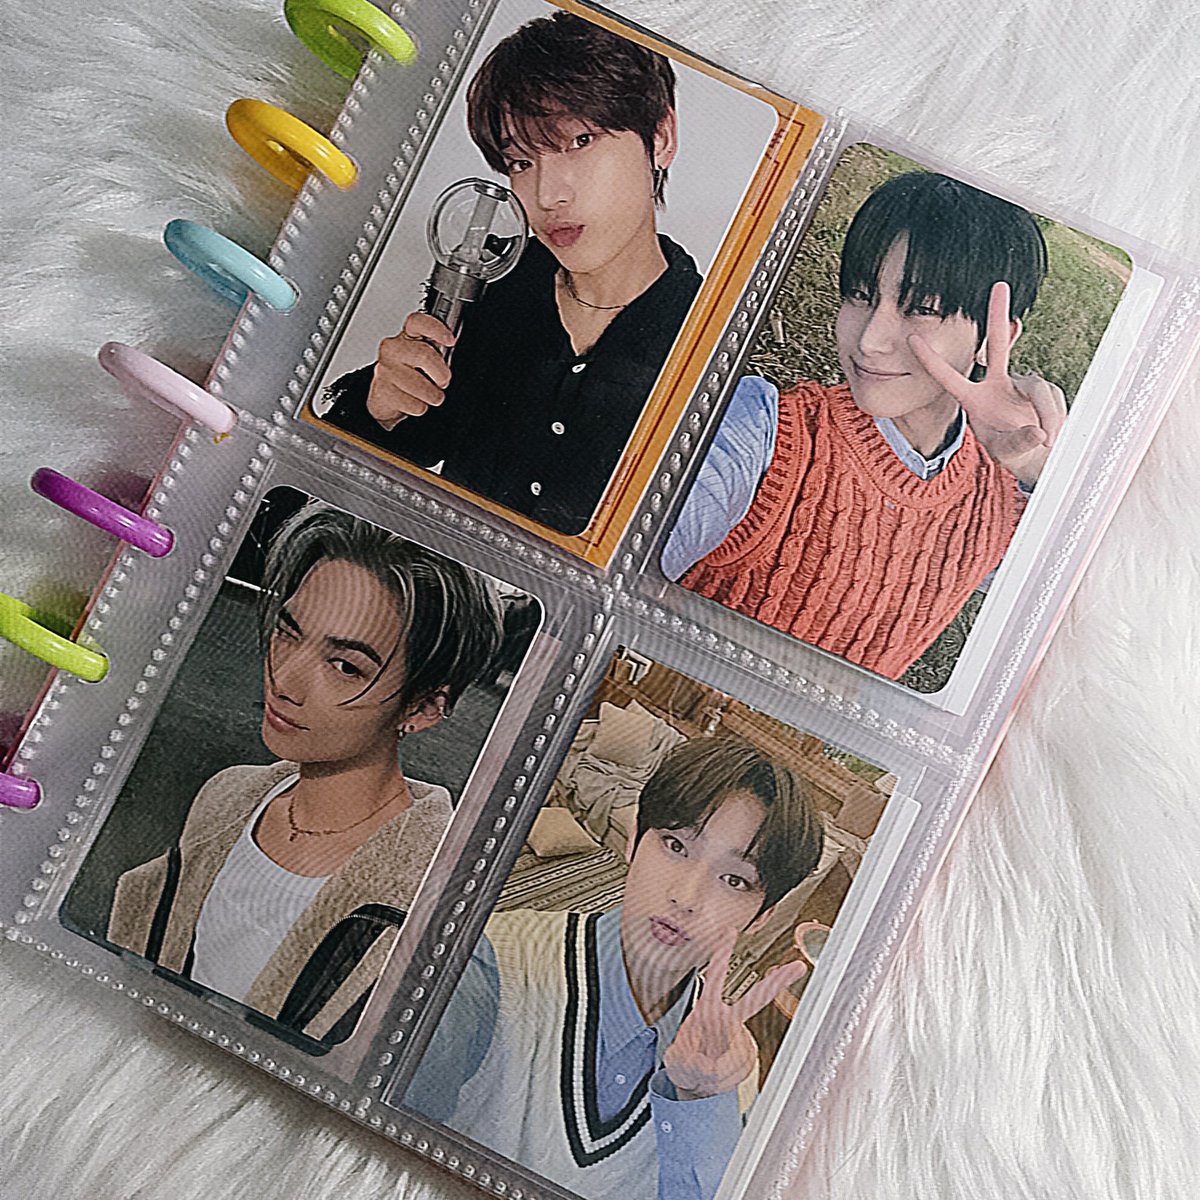 lf god miner later @ 9 pm. where : @.phpophaven when : later 9 pm pls help me mine 1 OT7 set. can give one of the pc below or small cash incentive for successful claimer.